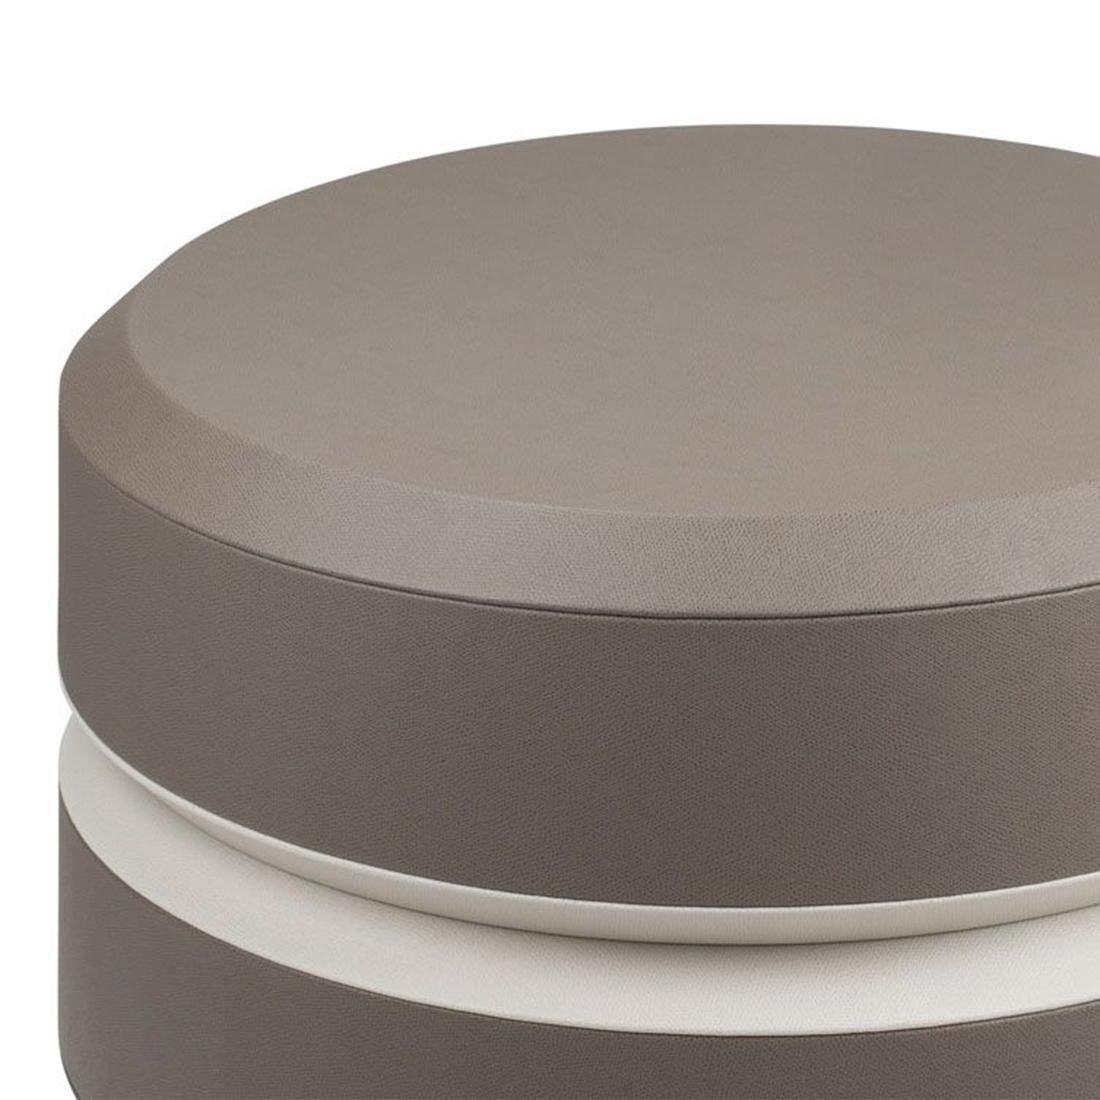 Side table Liguria large with solid wood structure covered with 
genuine leather in smokey finish. Trim in genuine leather in light 
grey finish. Also available with other leather color finishes on request.